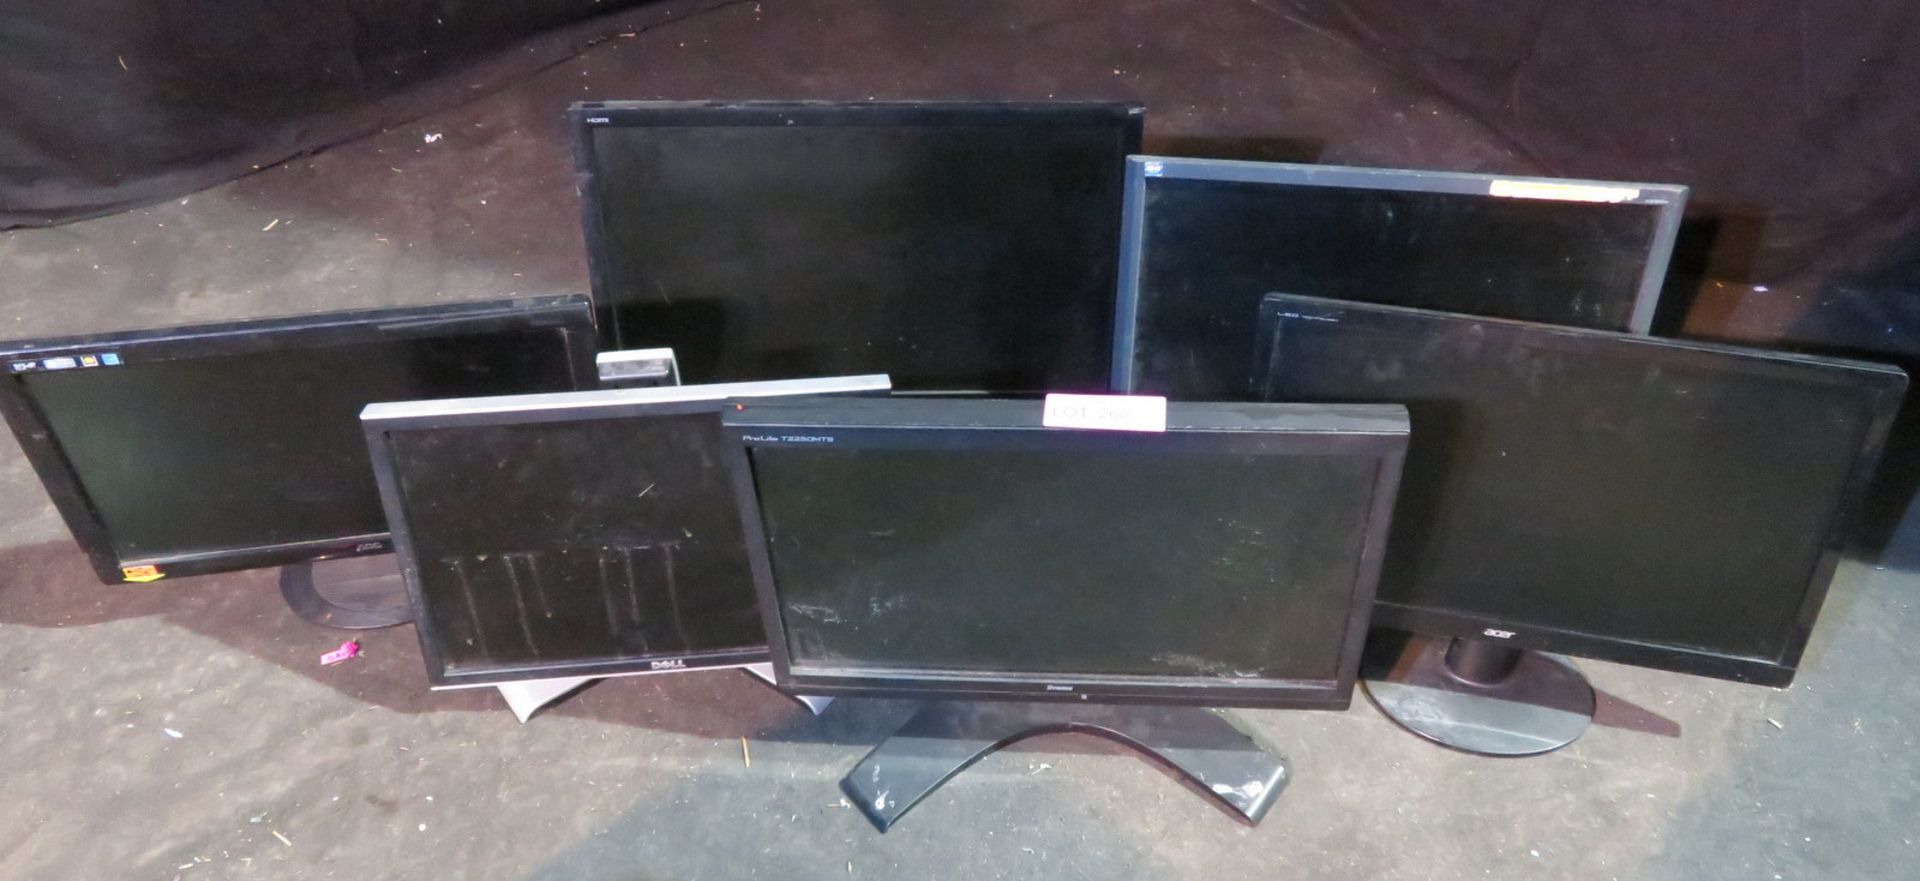 6 x LCD computer monitors of various makes and sizes. Including Dell, Acer and Iiyama.